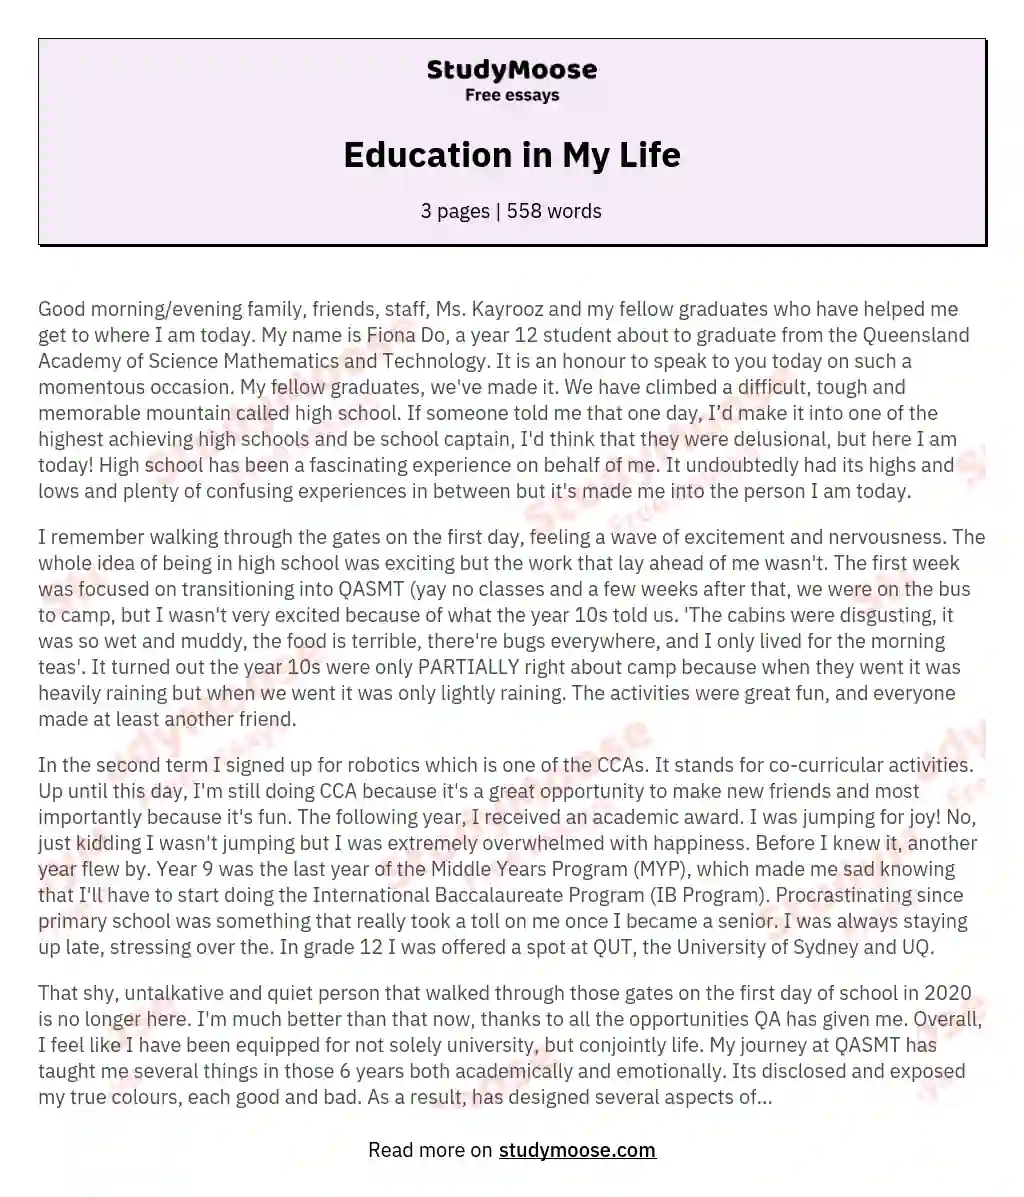 Education in My Life essay